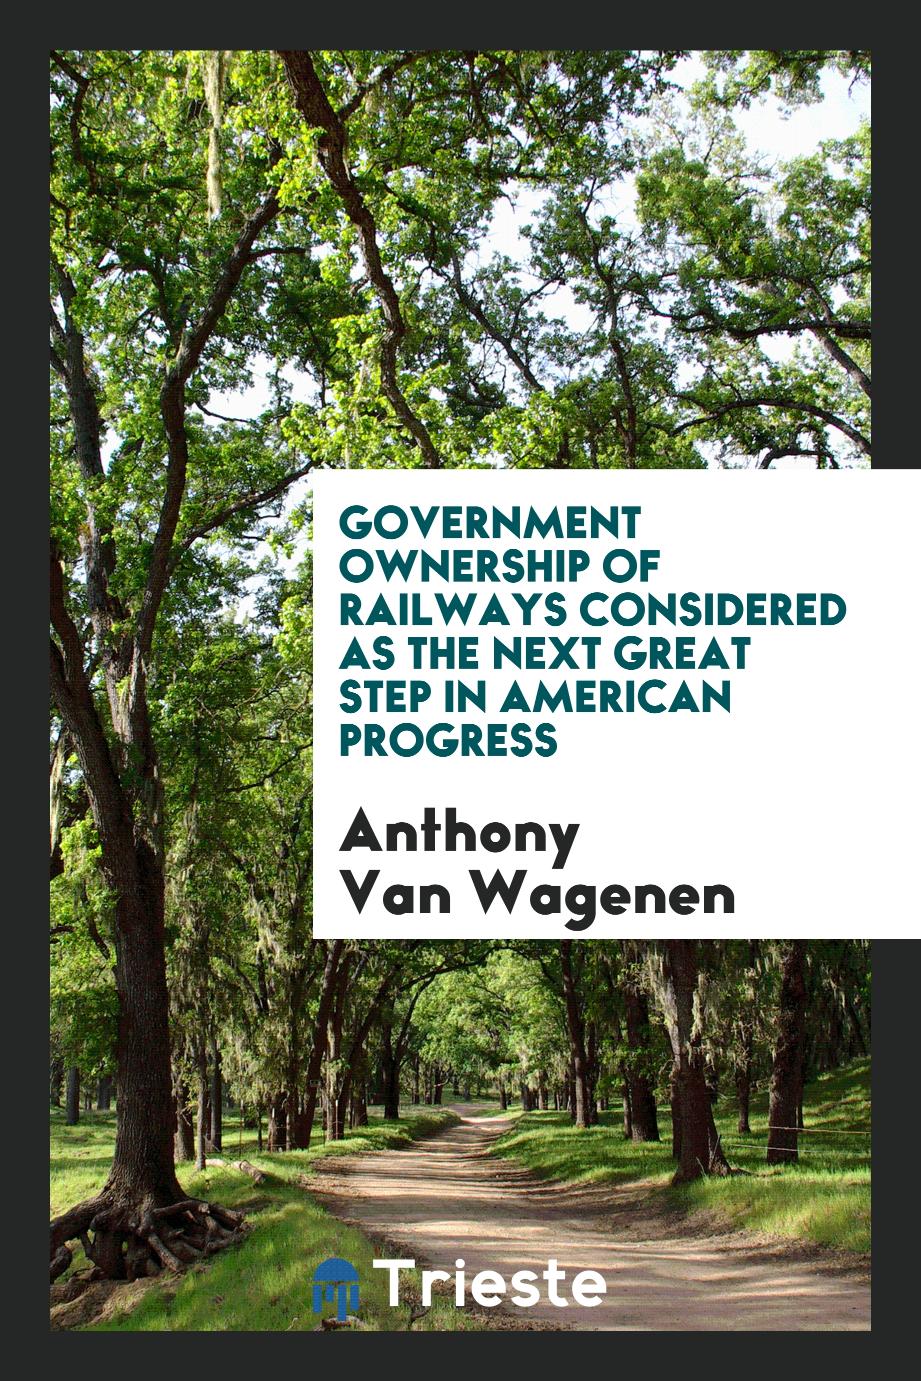 Government ownership of railways considered as the next great step in American progress